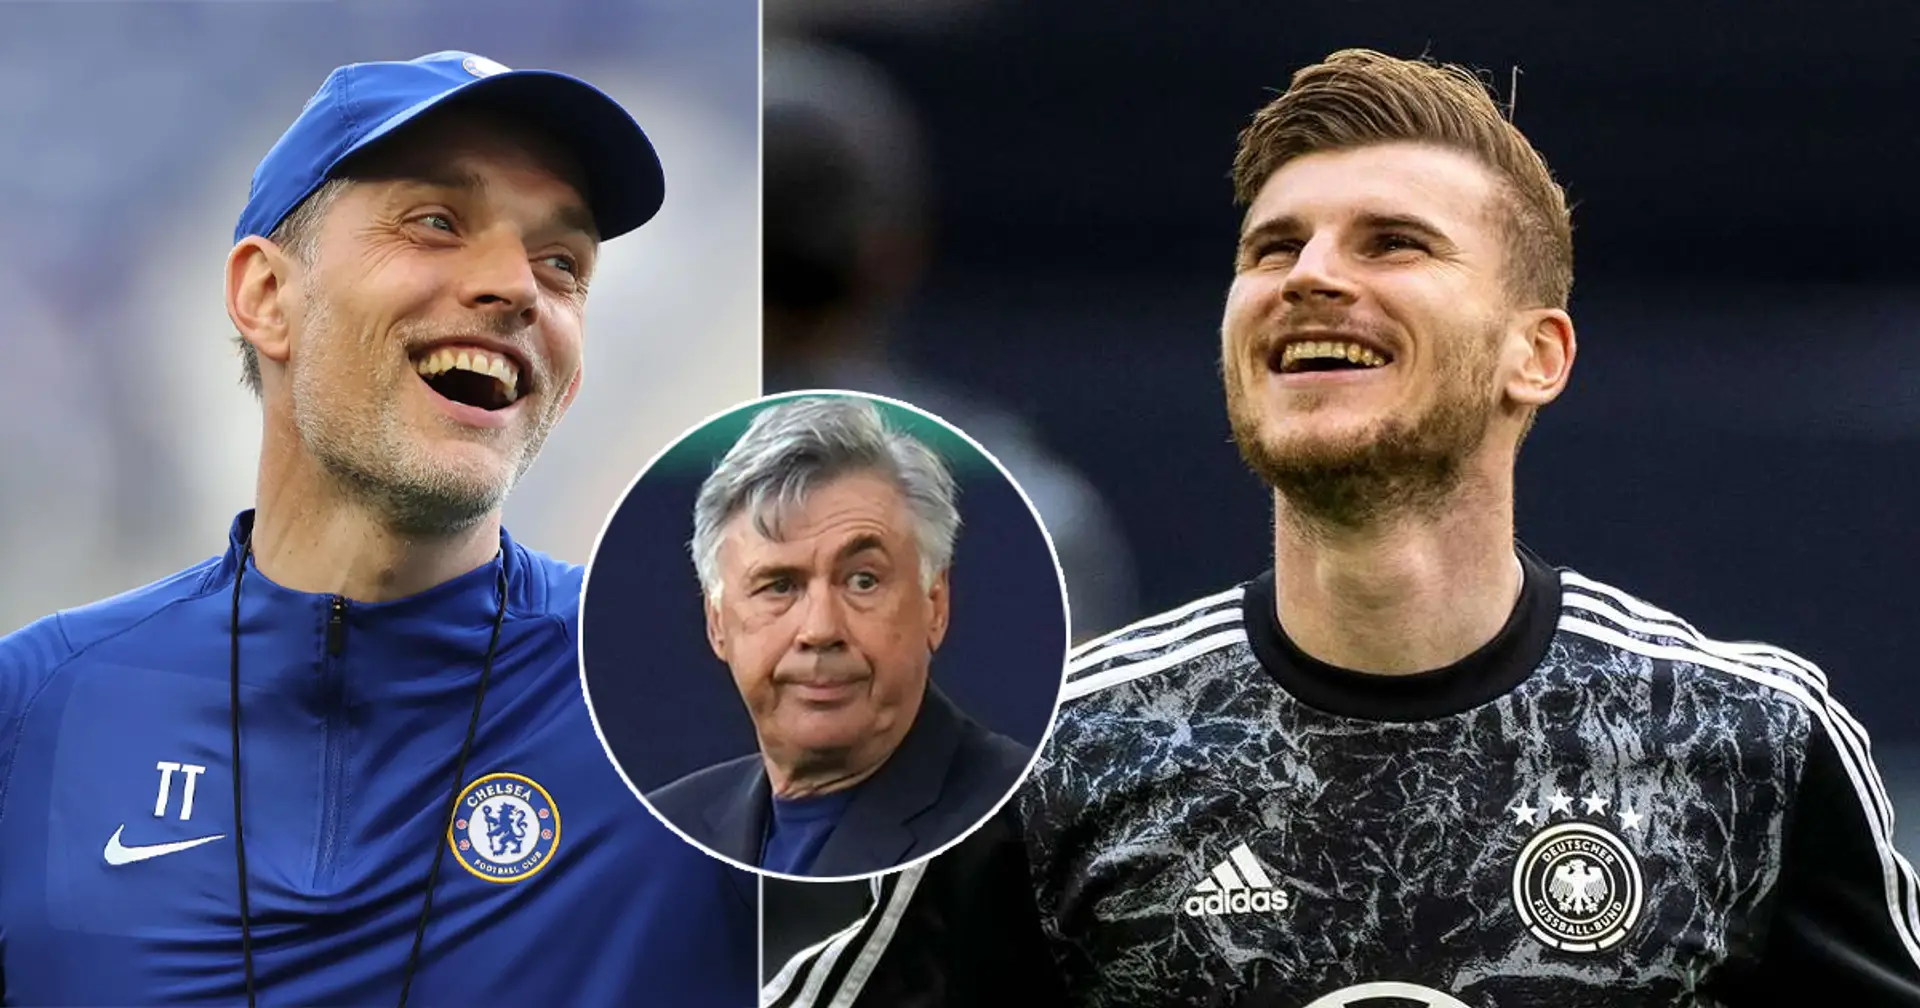 Tuchel wants to keep Werner despite Real Madrid 'contemplating' a move (reliability: 3 stars)